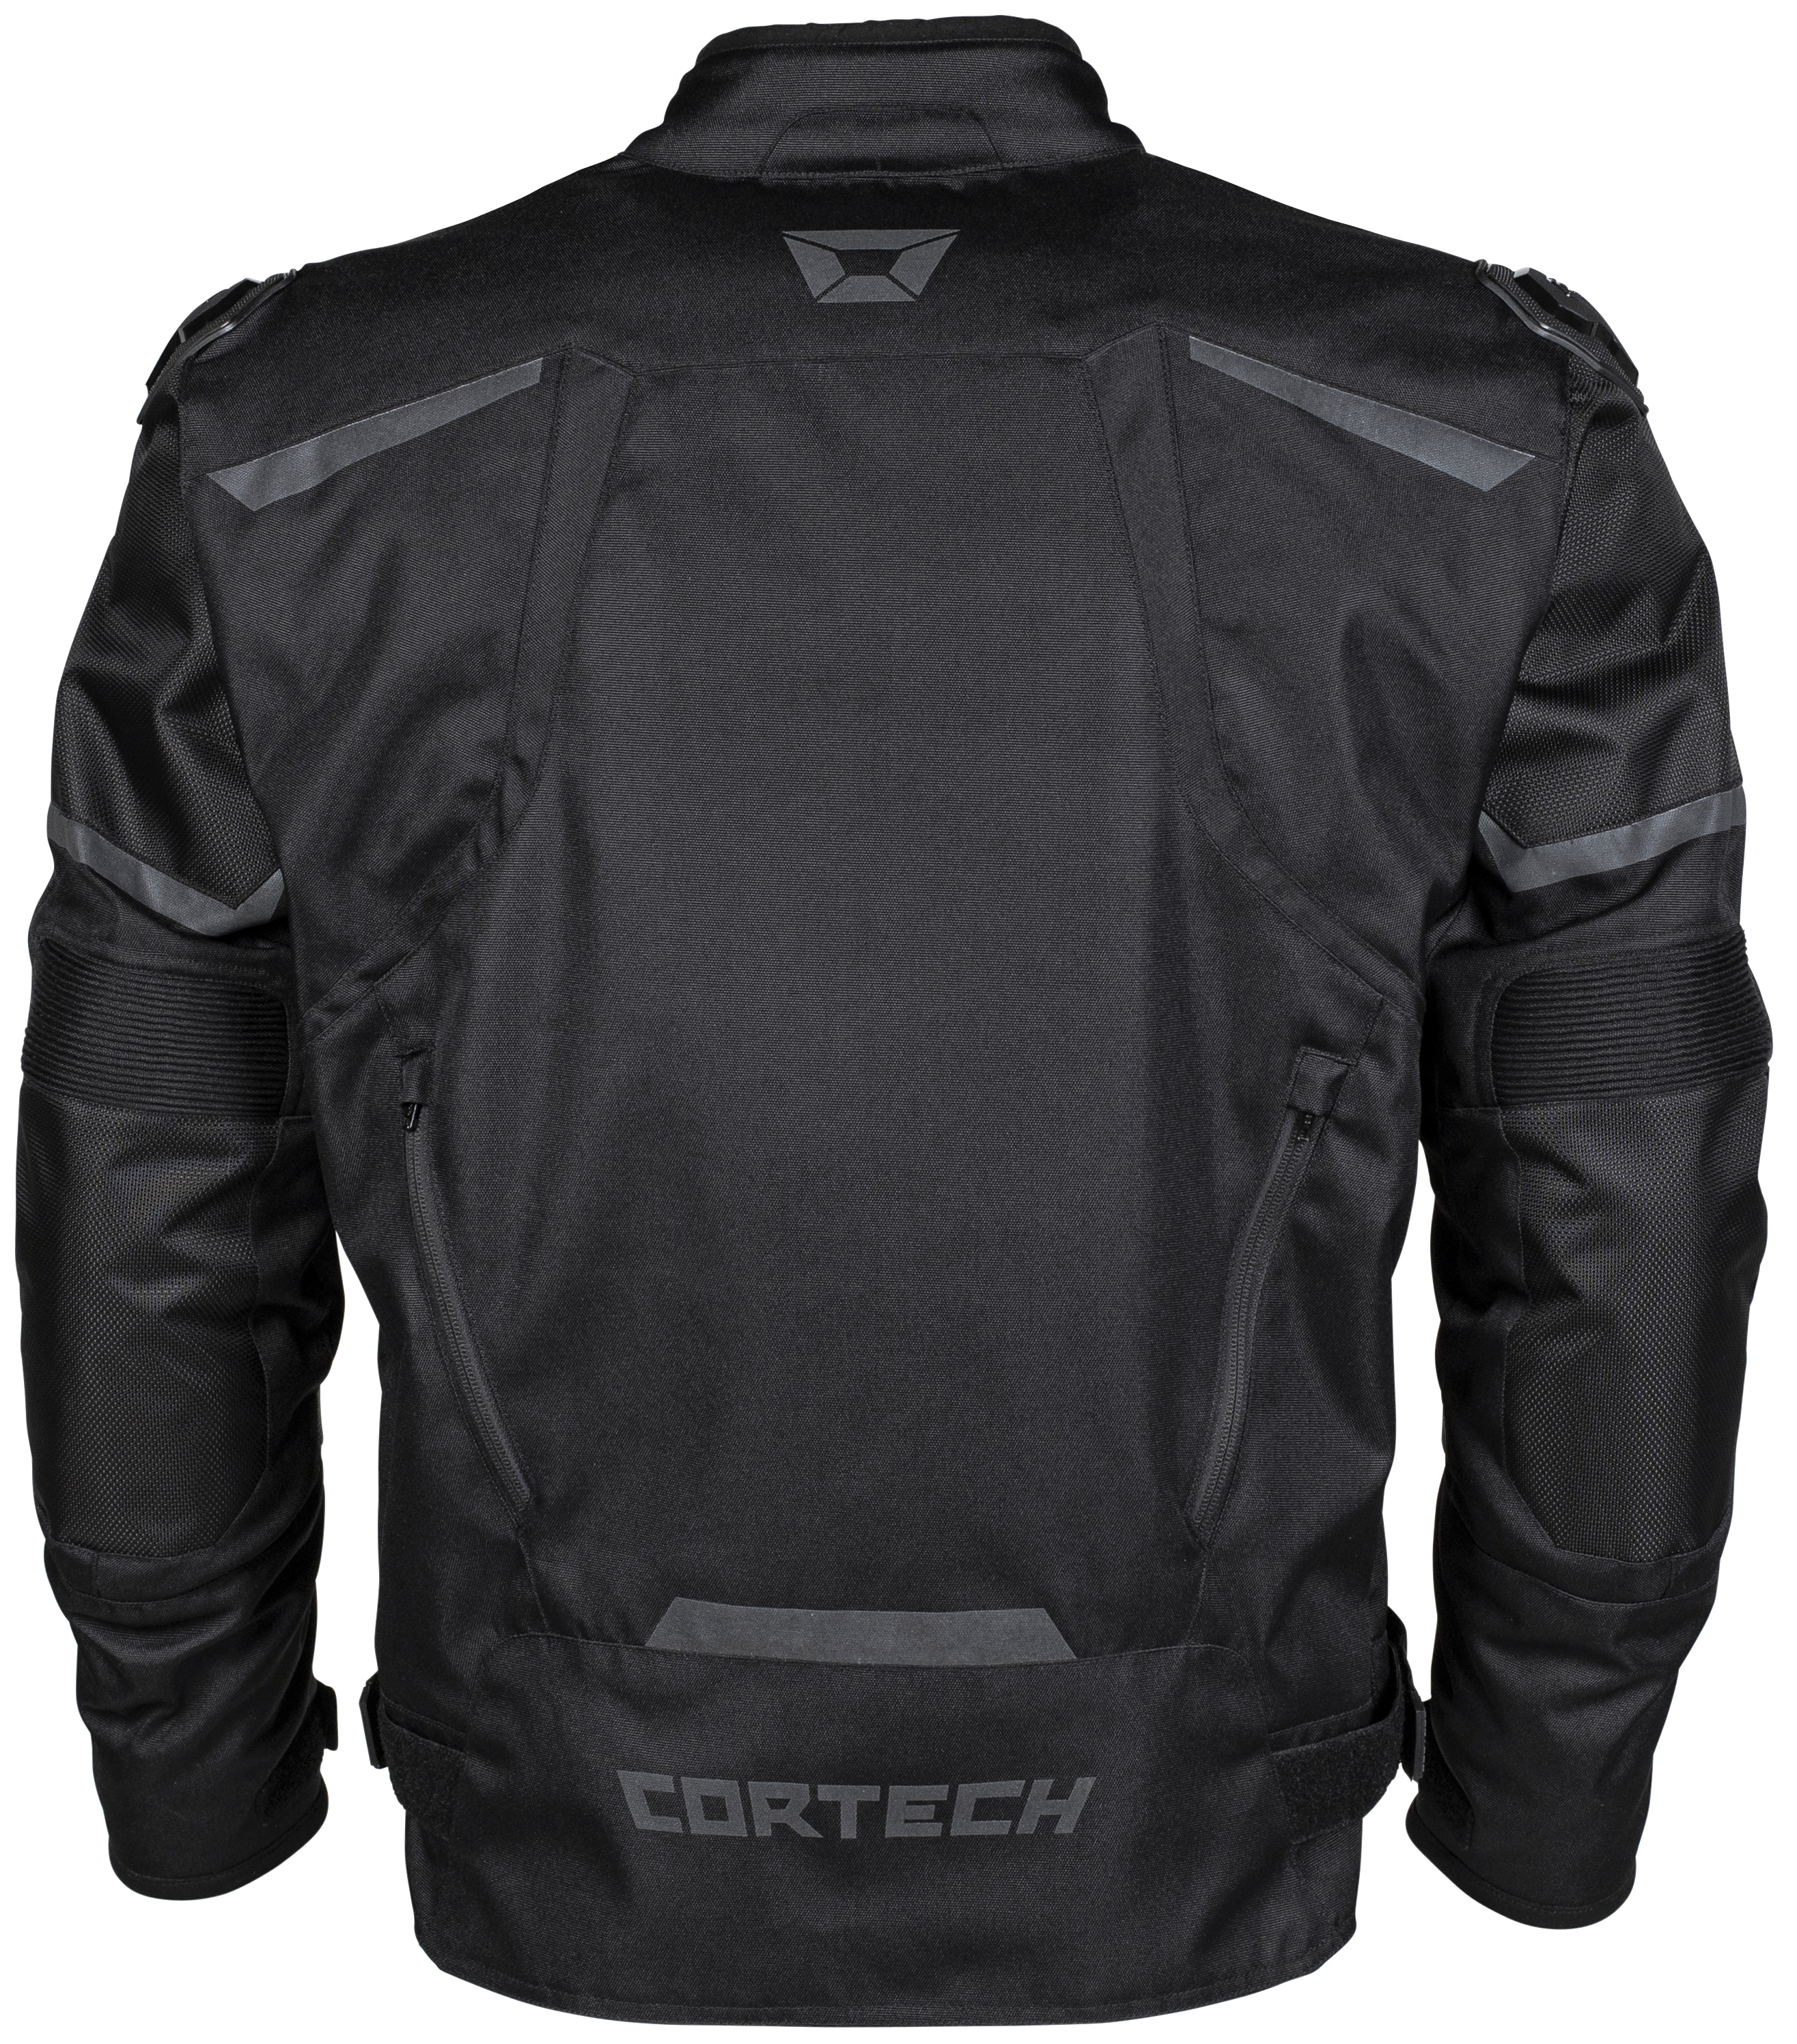 Hyper-Tec Armored Motorcycle Riding Jacket Black 2X-Large - Click Image to Close